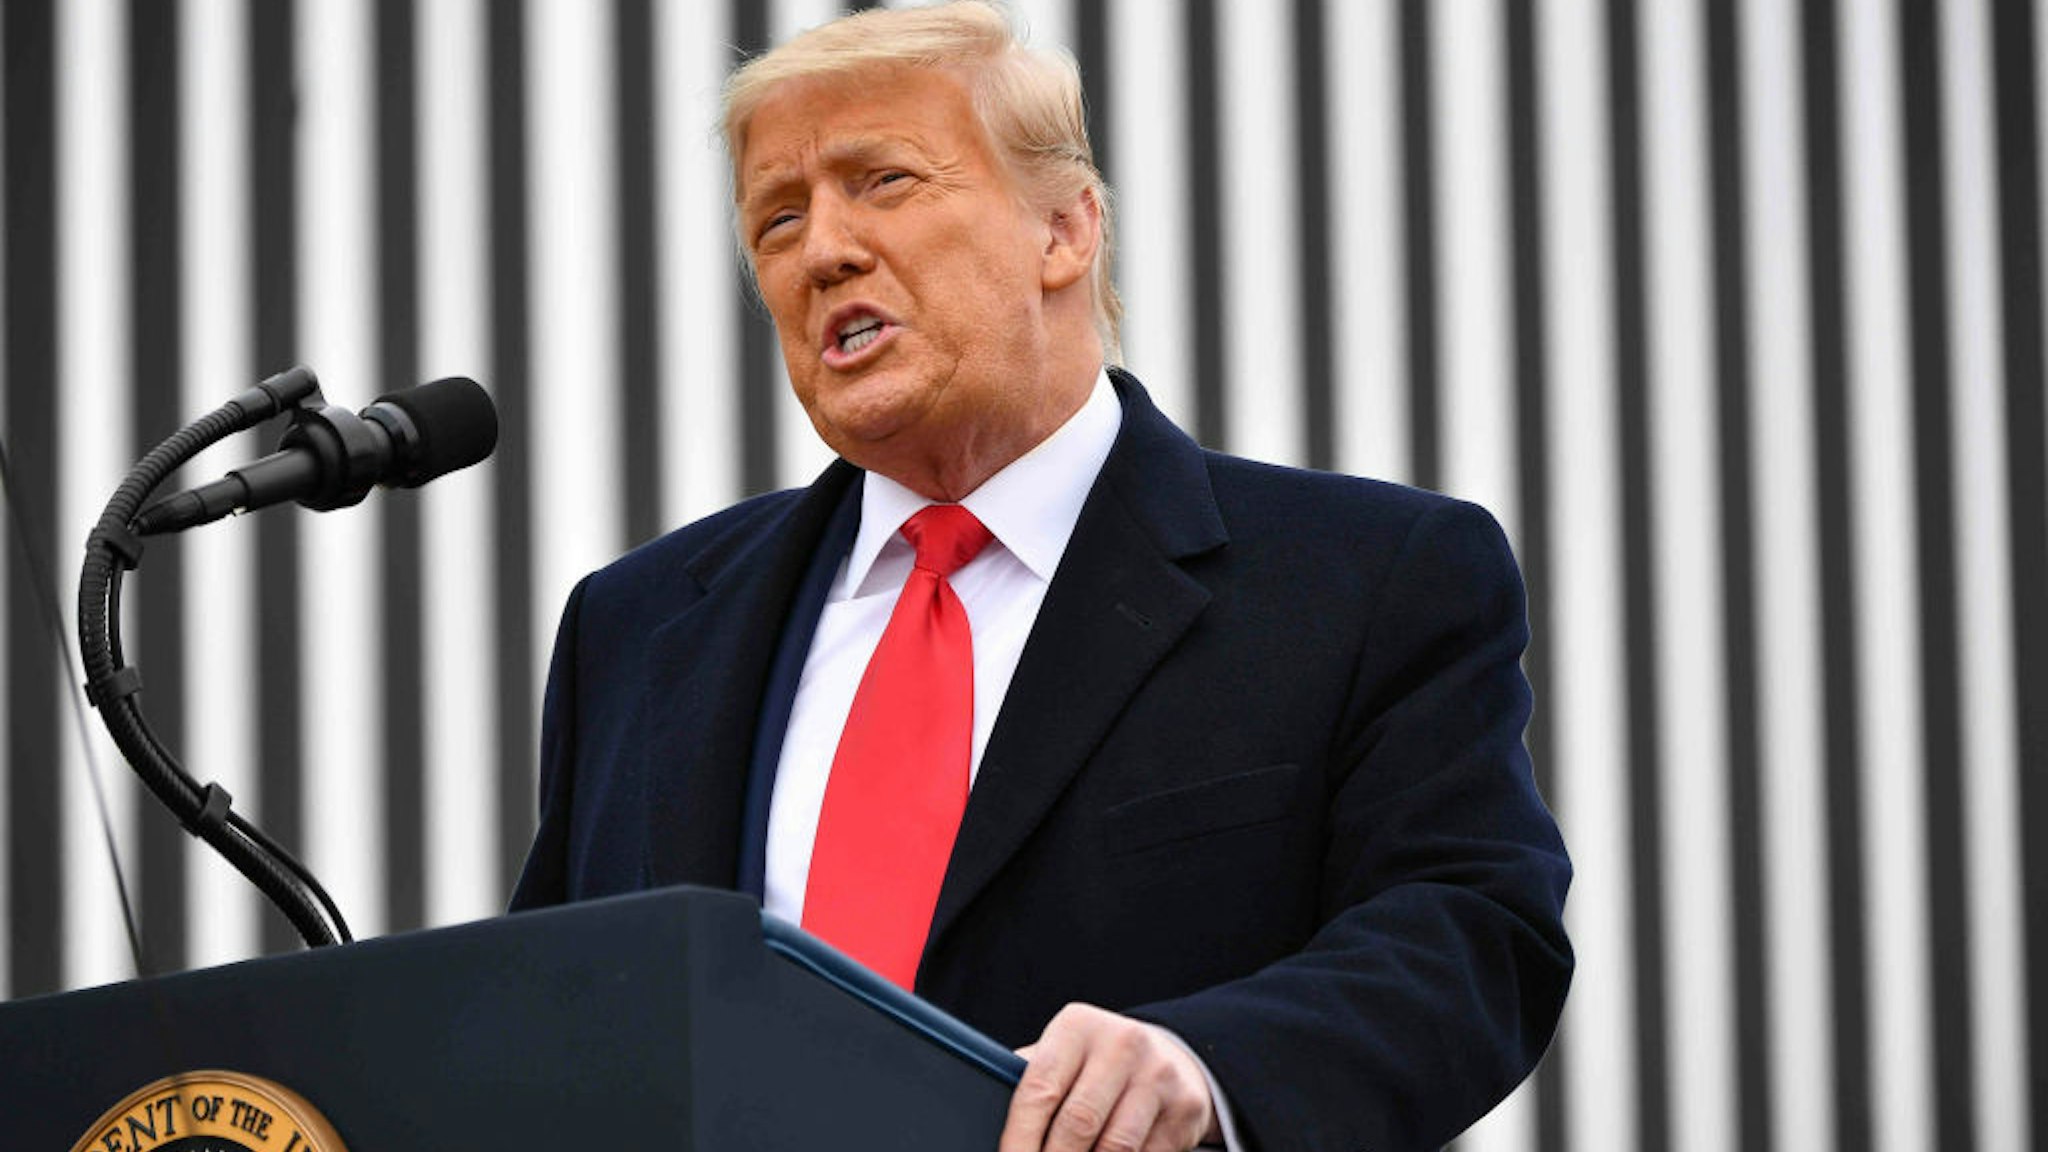 US President Donald Trump speaks after touring a section of the border wall in Alamo, Texas on January 12, 2021. (Photo by MANDEL NGAN / AFP) (Photo by MANDEL NGAN/AFP via Getty Images)